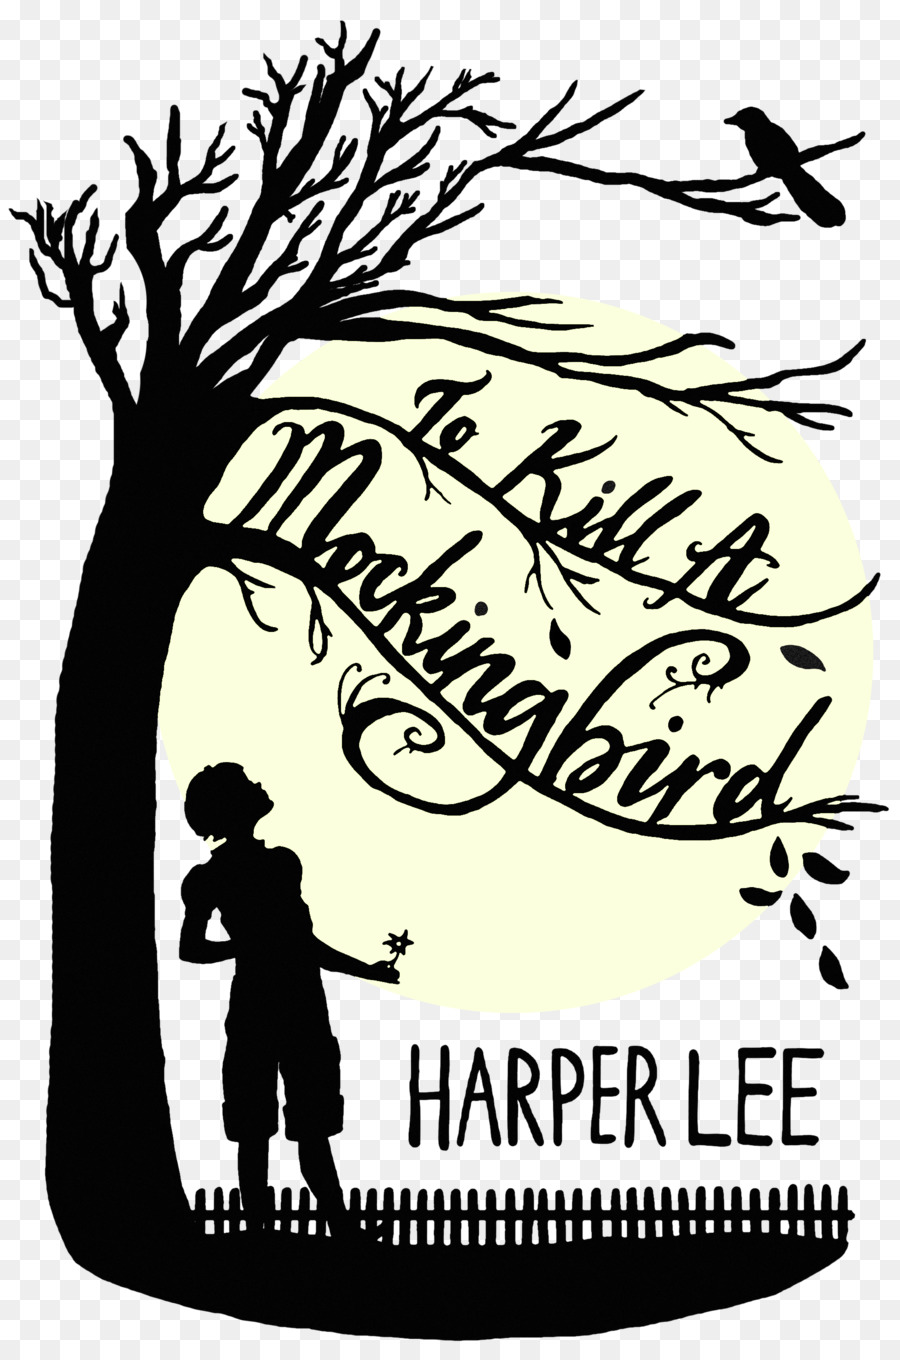 To Kill a Mockingbird Atticus Finch Monroeville Book cover Jem Finch - book png download - 1887*2839 - Free Transparent To Kill A Mockingbird png Download.